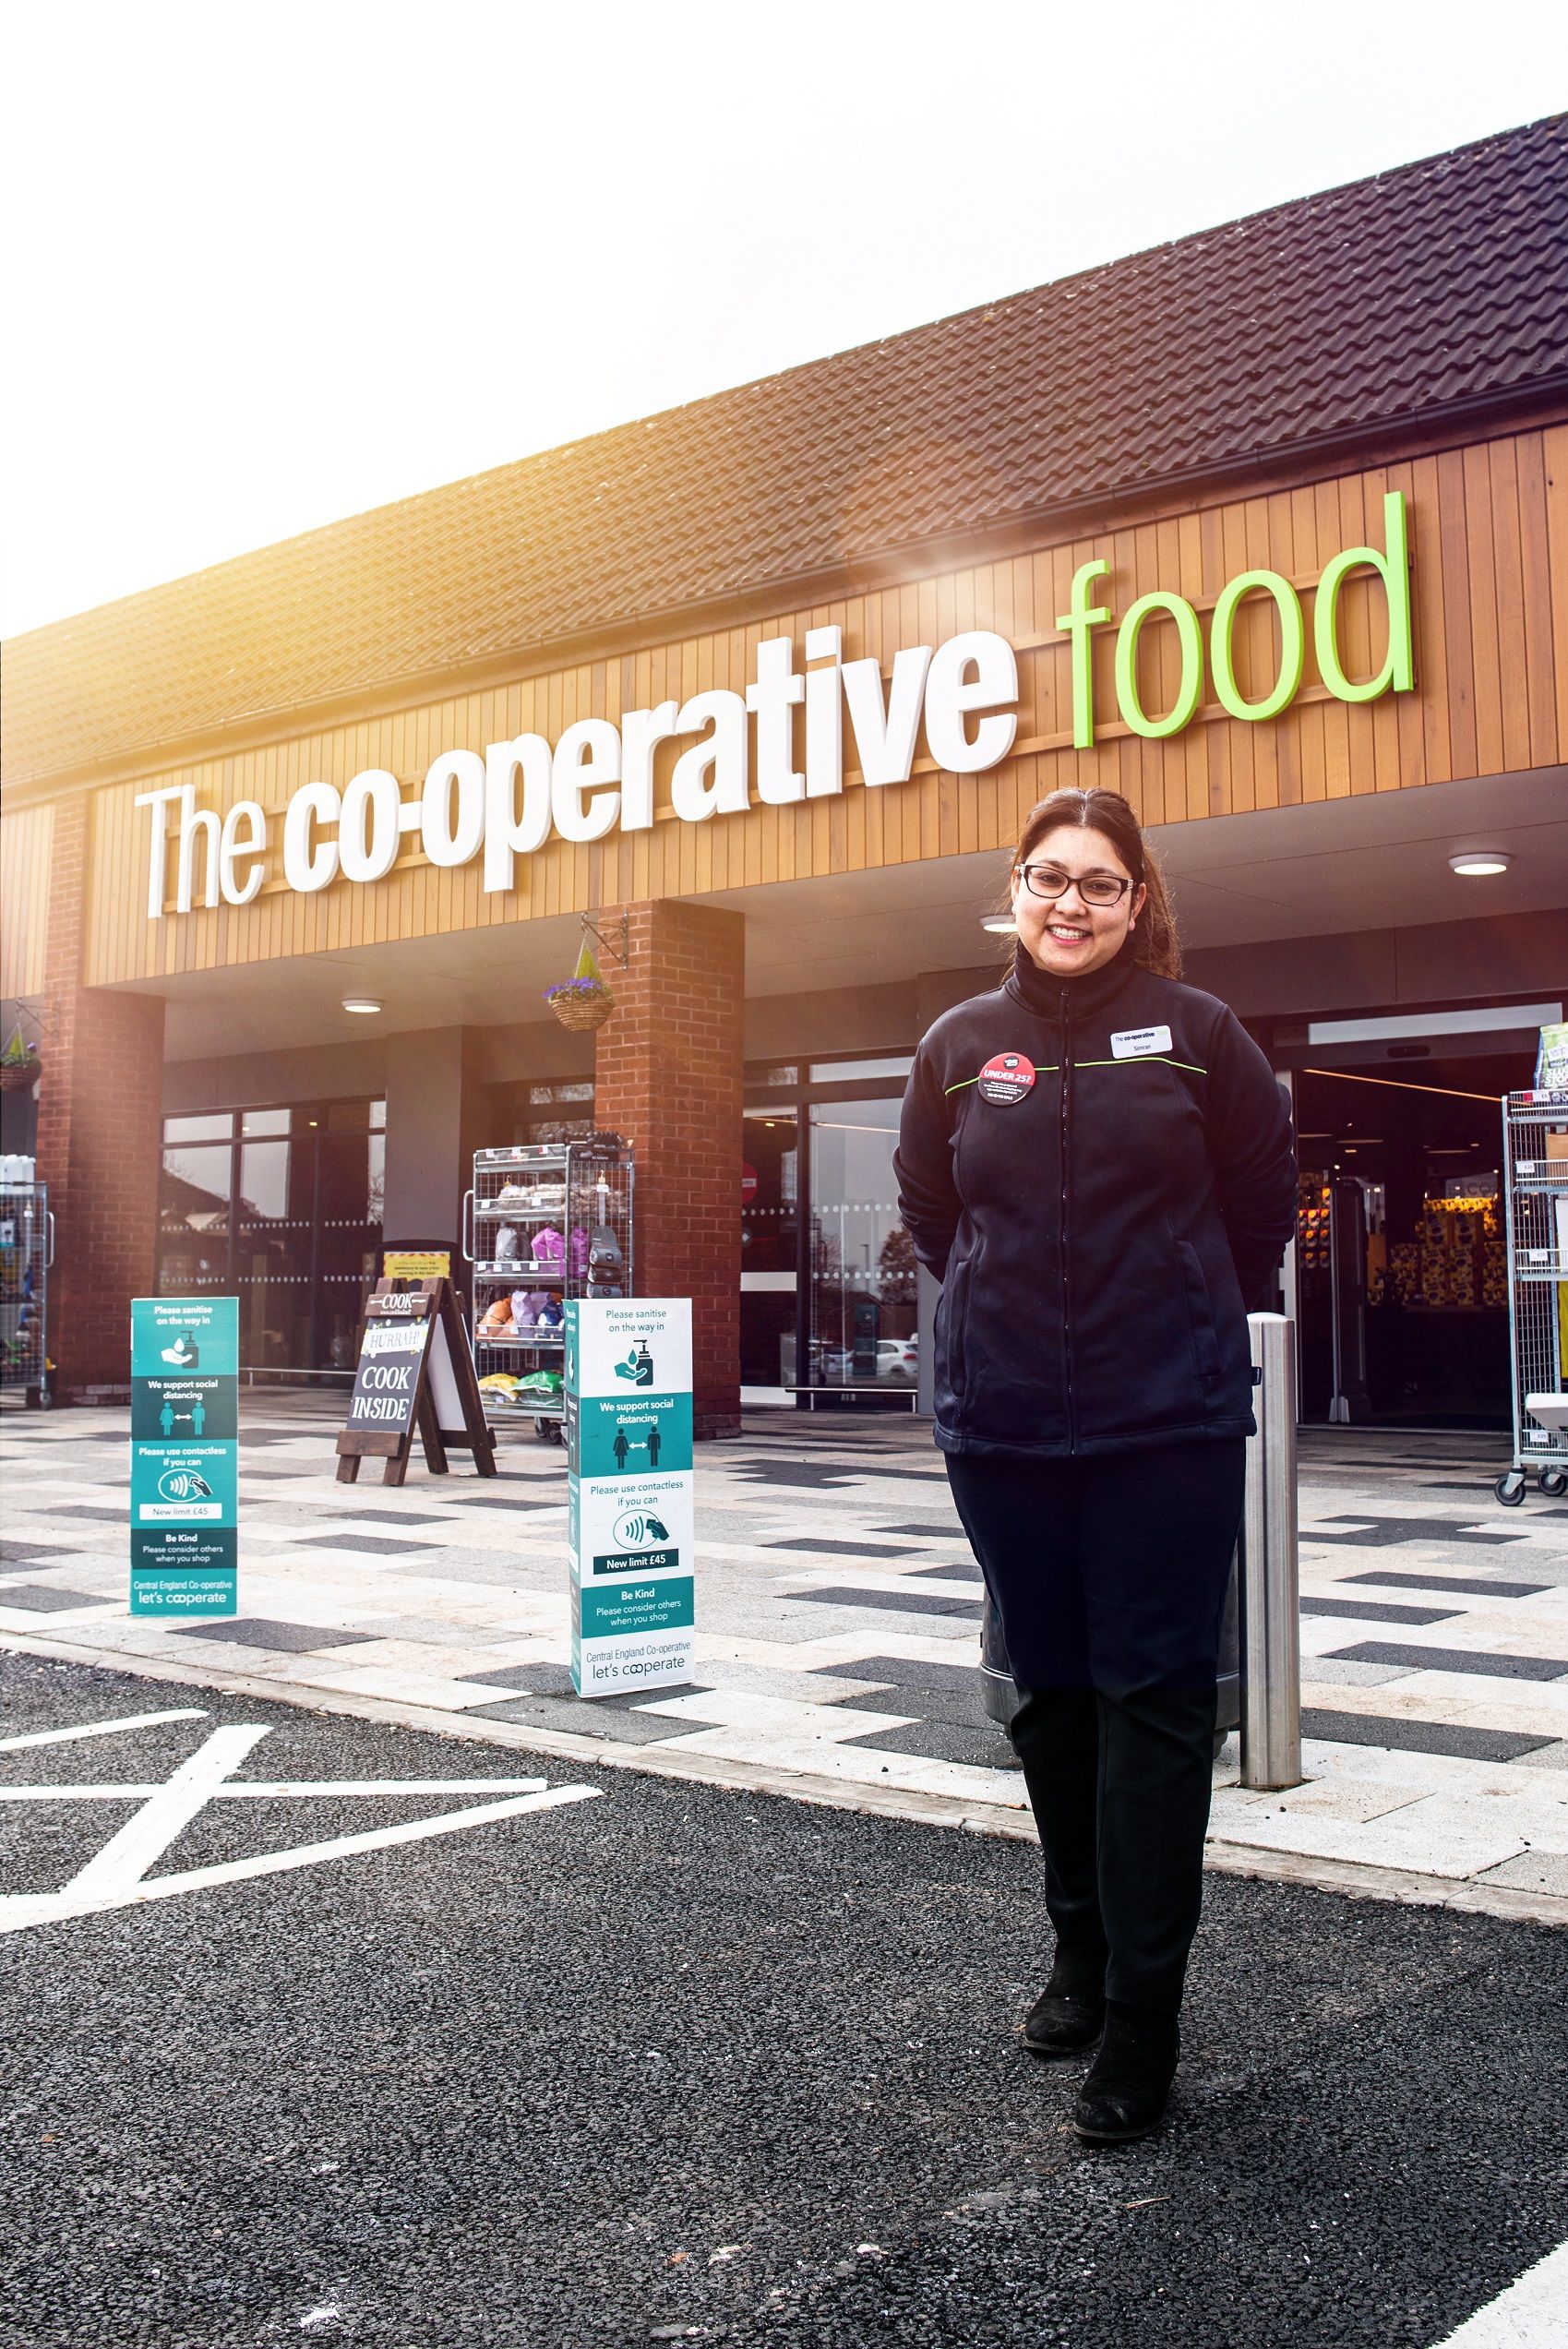 Central England Co-op is awarded Leading Co-operative of the Year in celebration of its community work